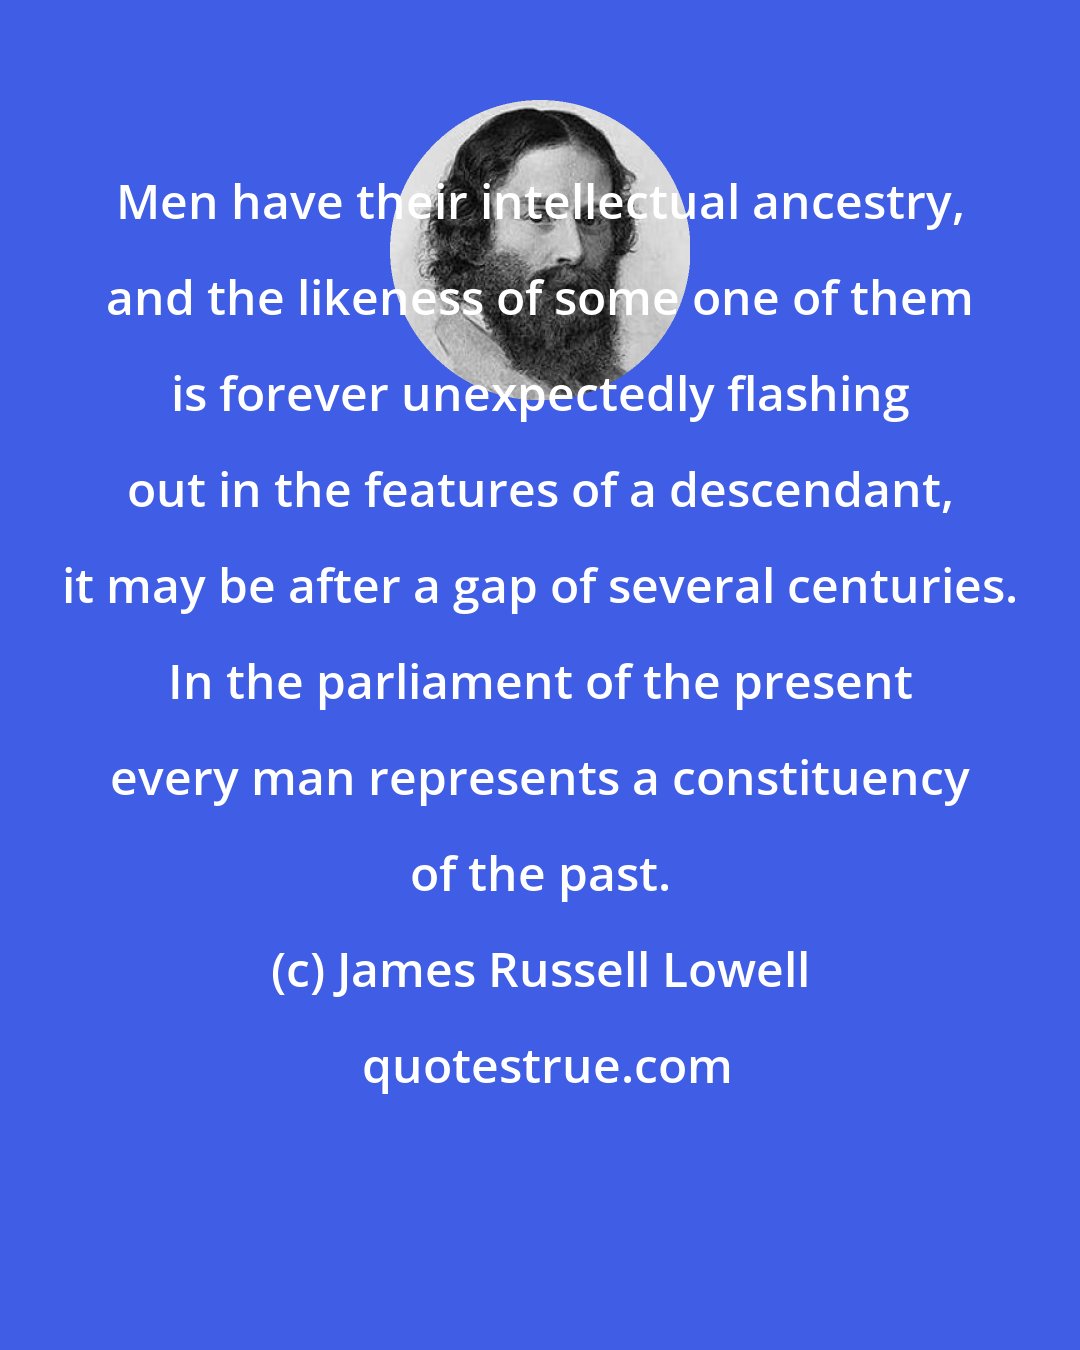 James Russell Lowell: Men have their intellectual ancestry, and the likeness of some one of them is forever unexpectedly flashing out in the features of a descendant, it may be after a gap of several centuries. In the parliament of the present every man represents a constituency of the past.